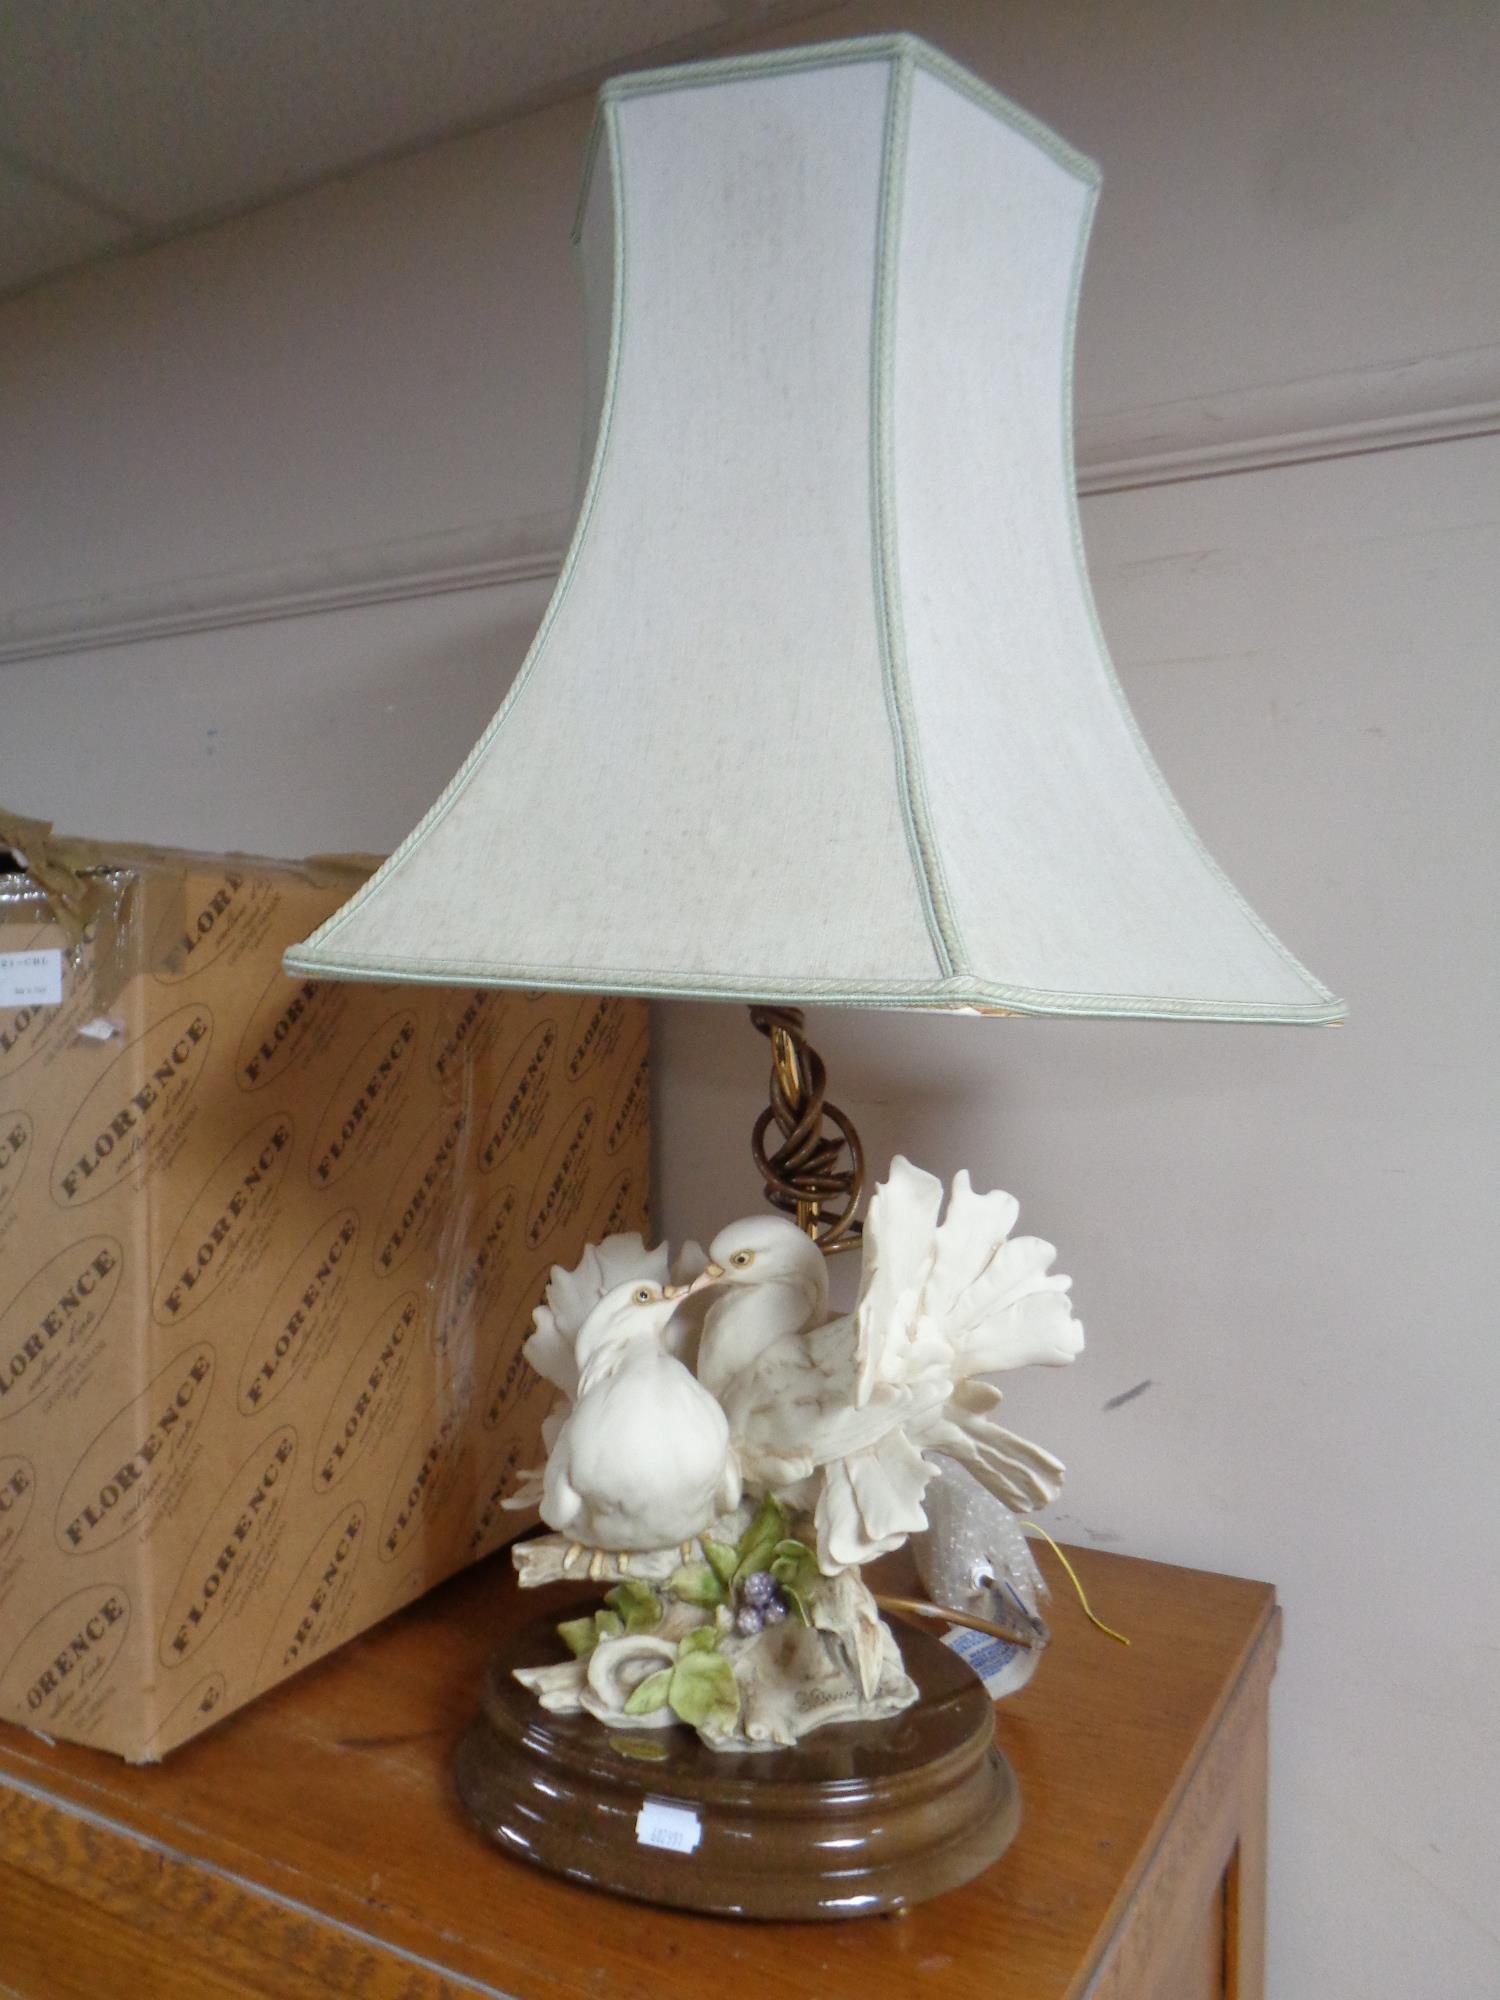 A Guiseppe Armani figural table lamp with shade, two lovebirds,